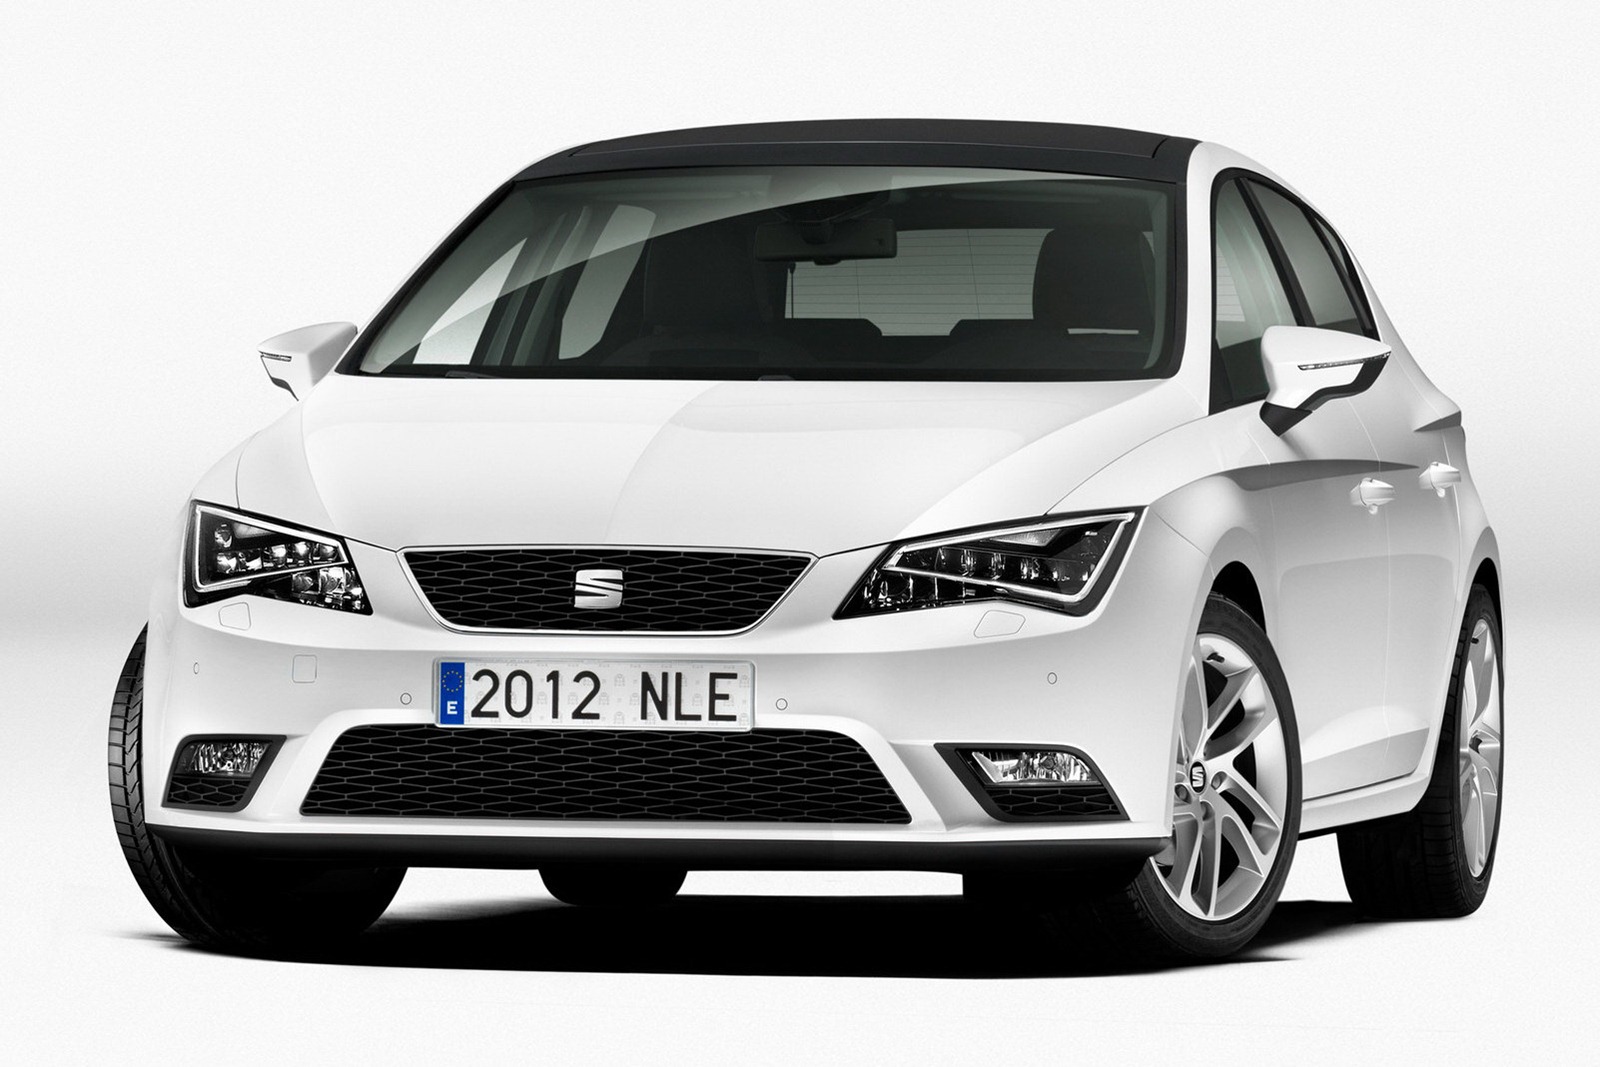 seat-leon-official-pictures-leaked-photo-gallery_5.jpg